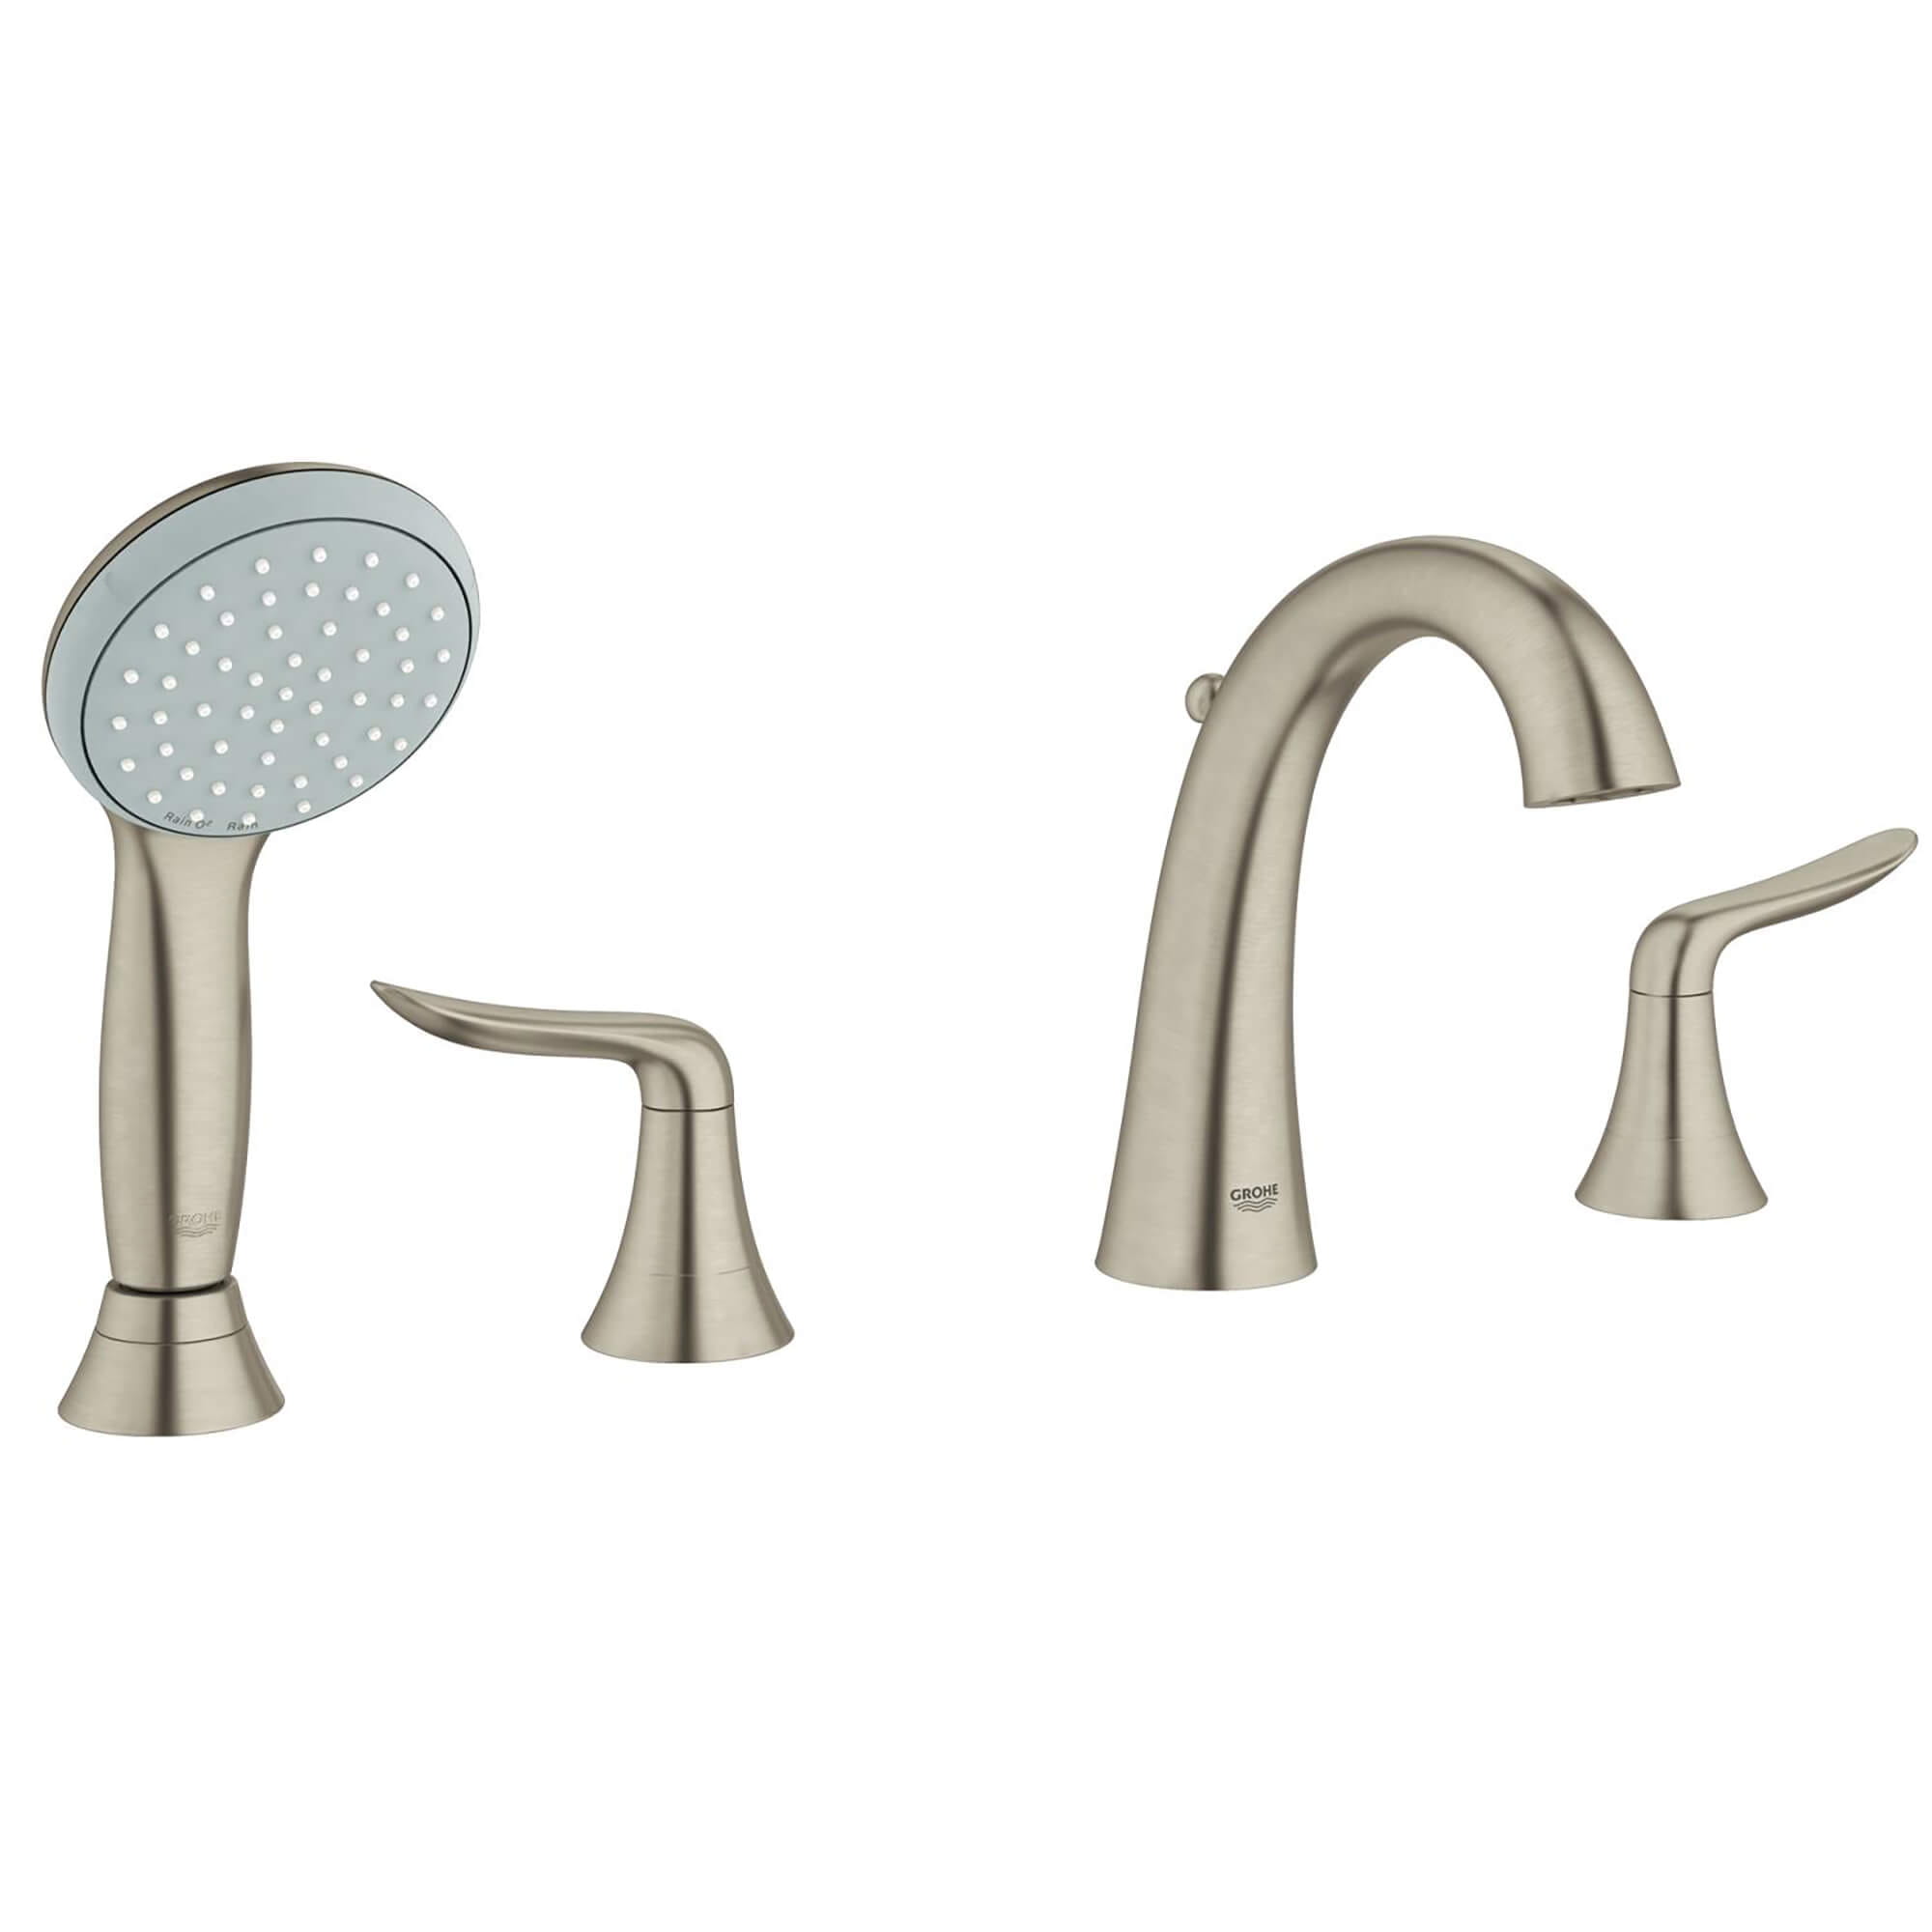 Agira 2HDL BATH 4 H US GROHE BRUSHED NICKEL